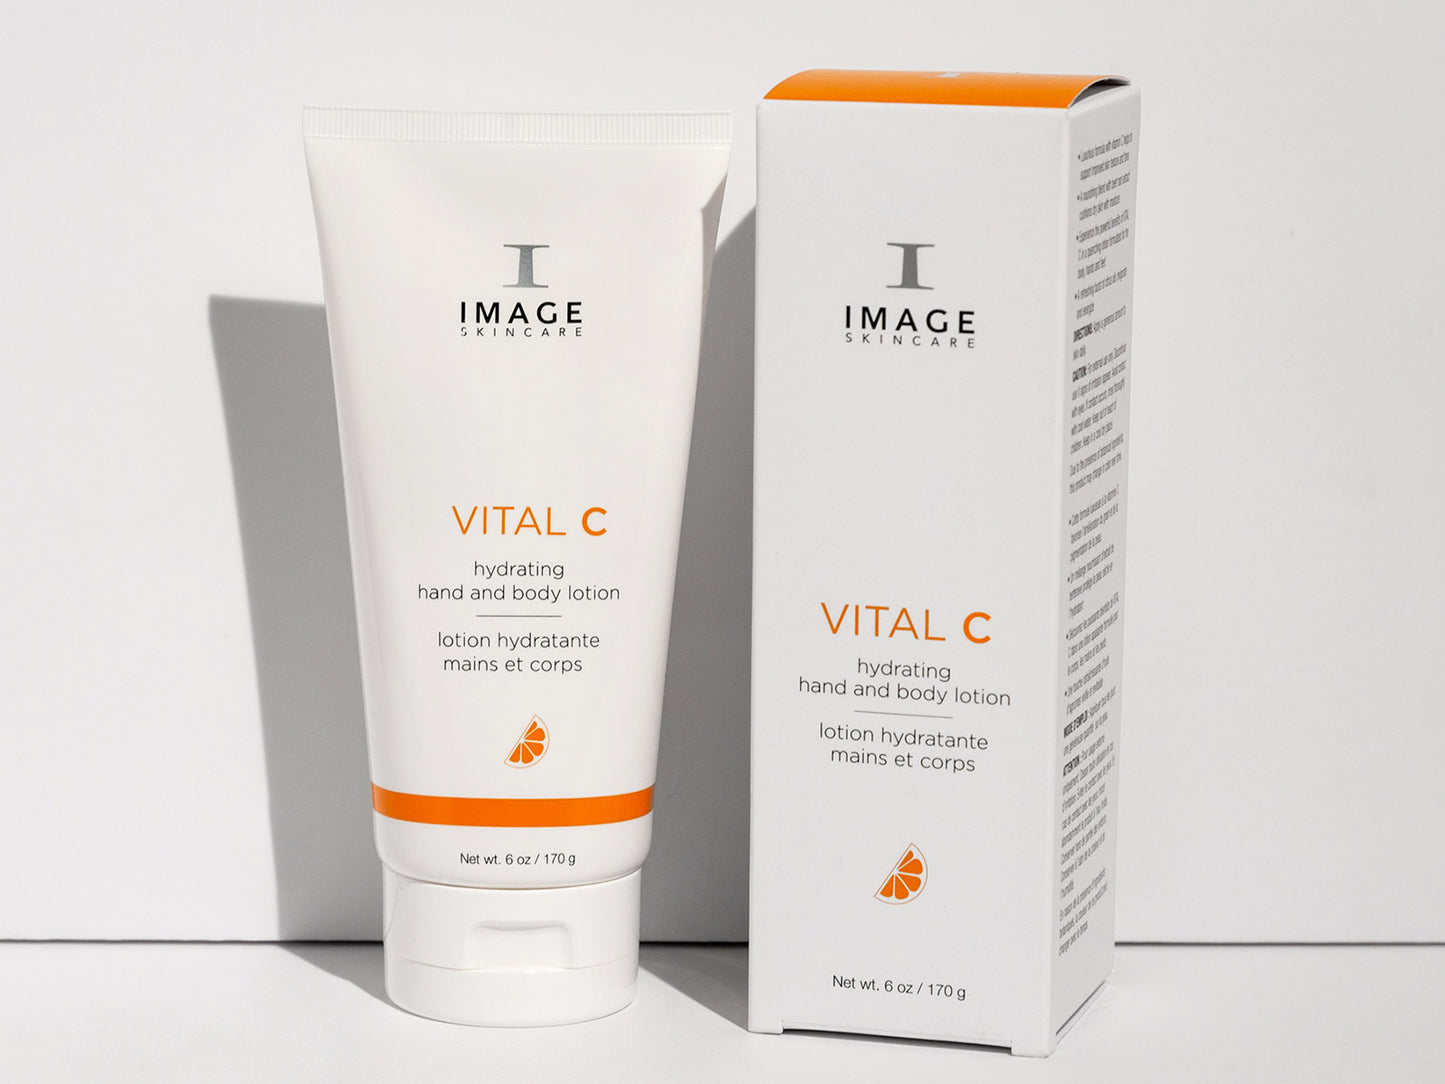 VITAL C - Hydrating Hand And Body Lotion